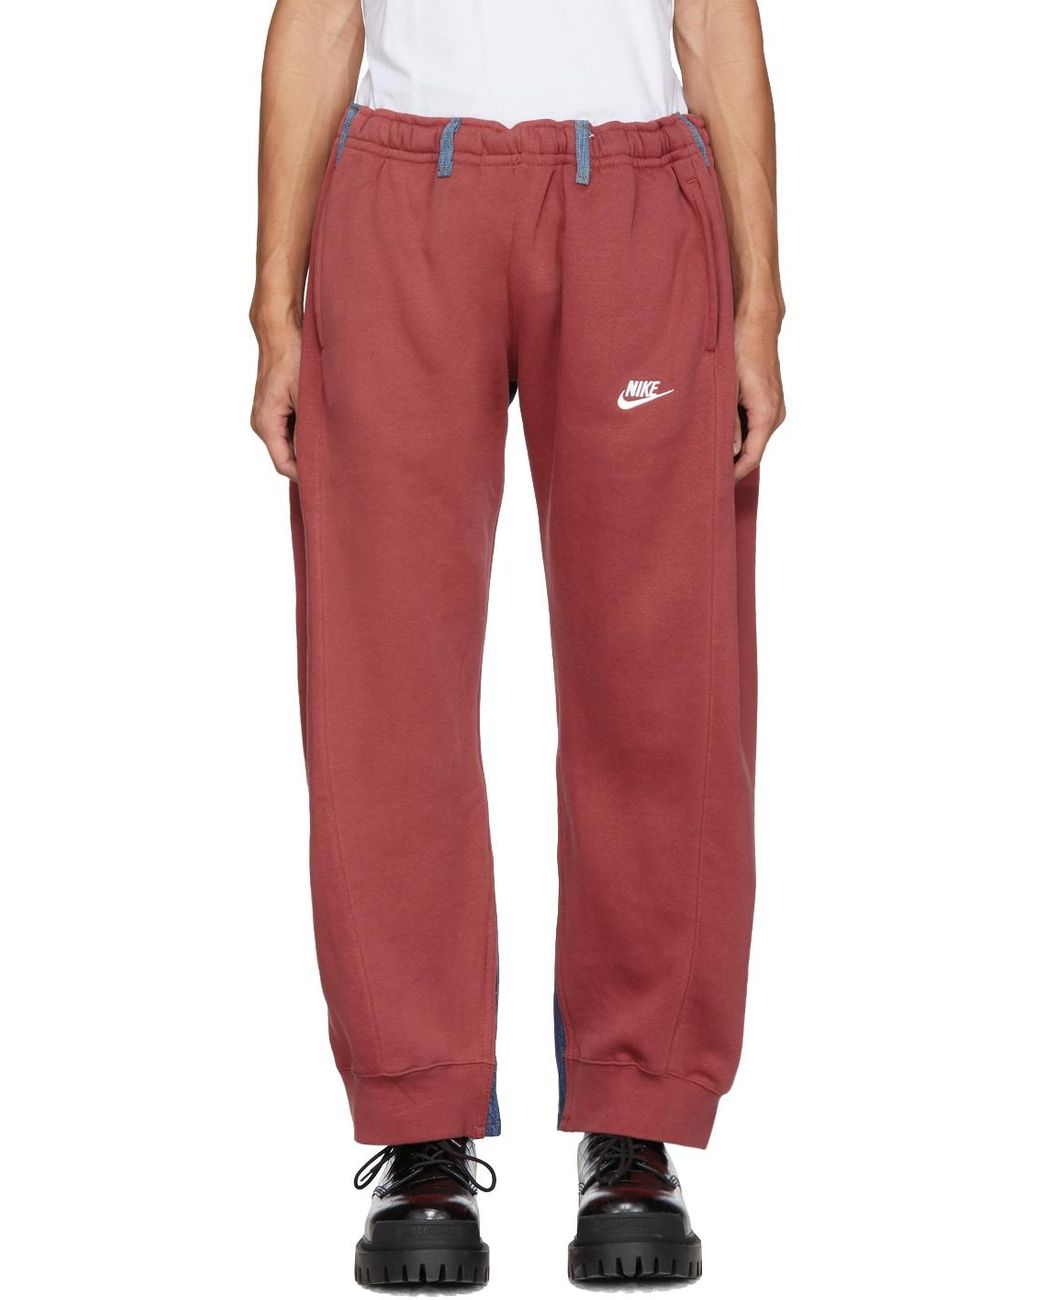 Bless Cotton Ssense Exclusive overjogging Jean Lounge Pants in Red 